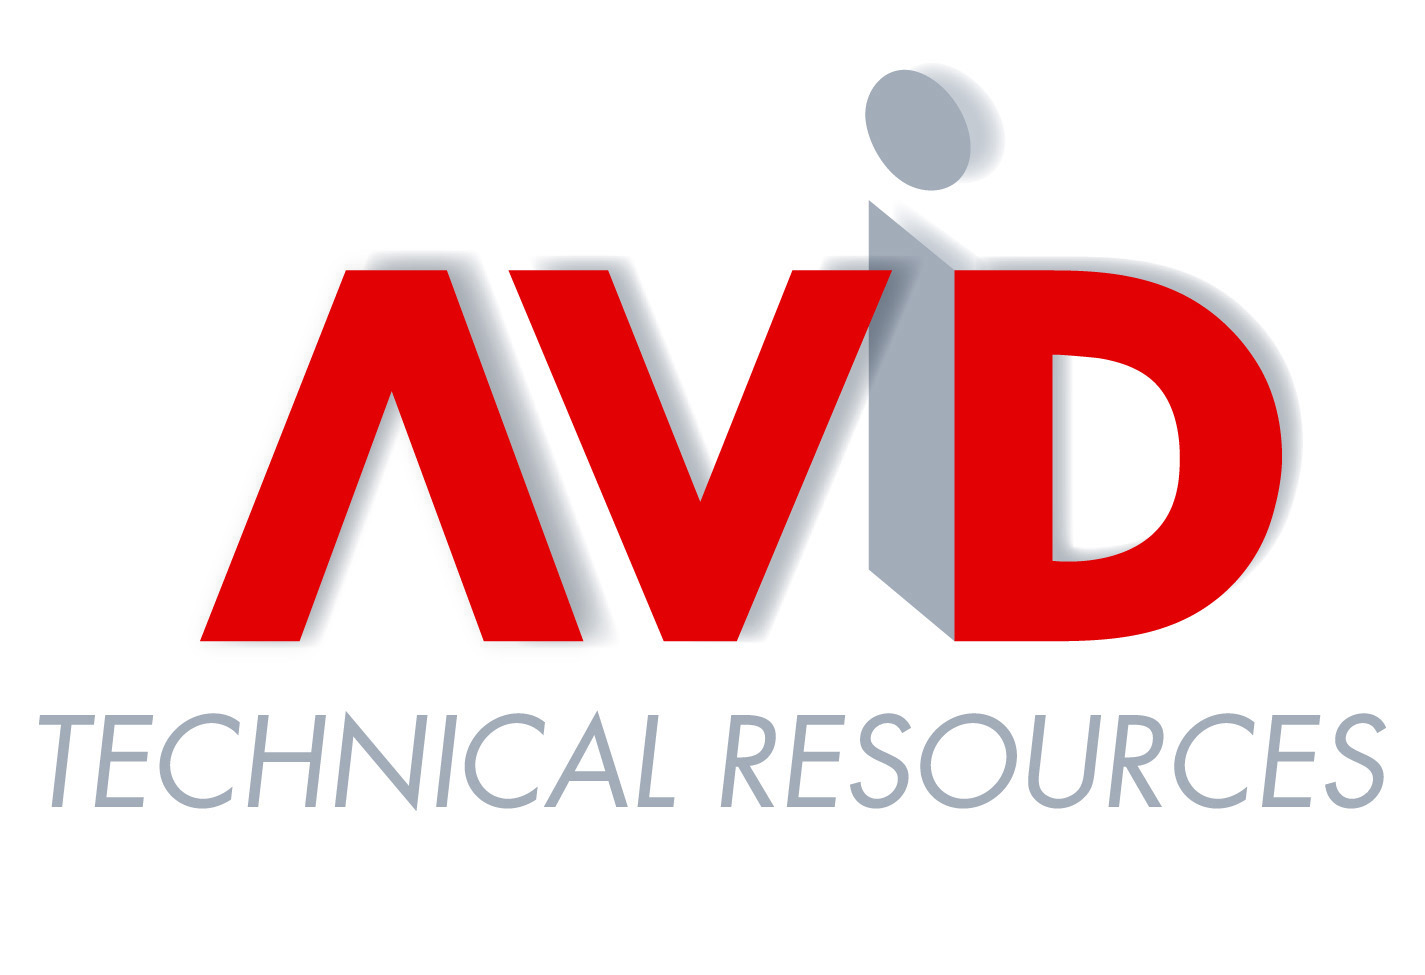 AVID Technical Resources — The Best and Brightest